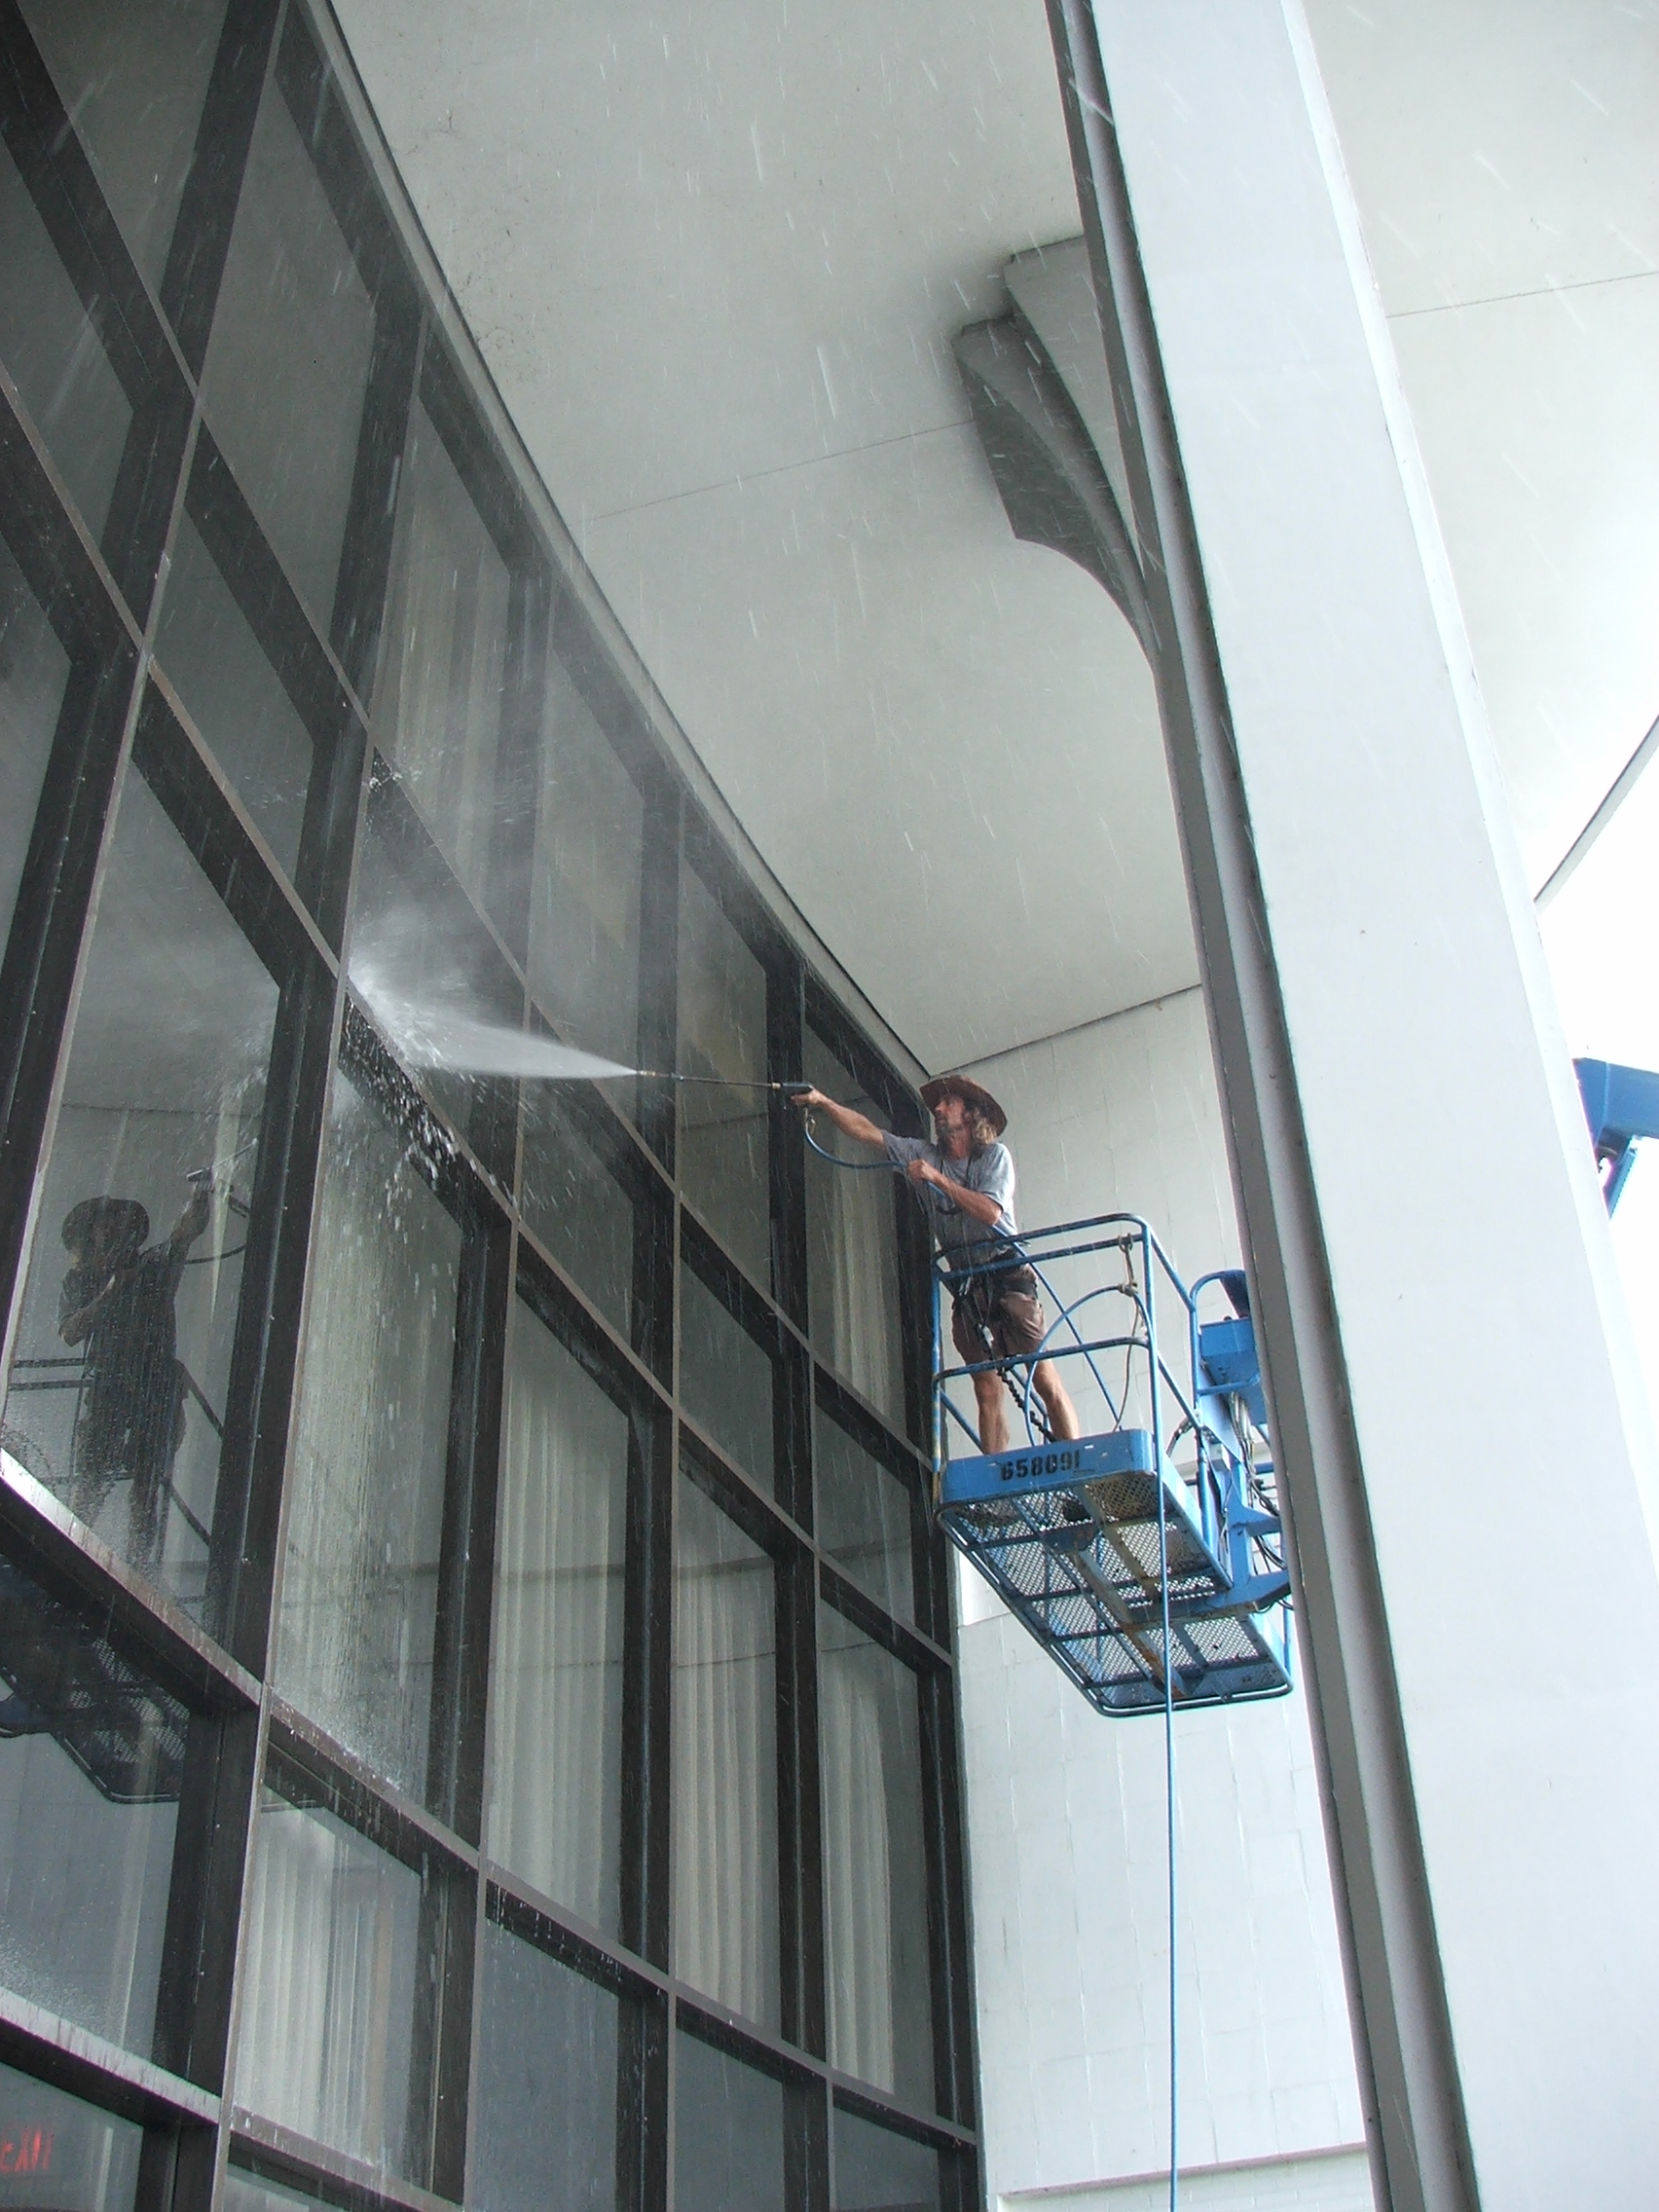 Pressure washing glass front entrance to remove dirt, cob webs and debris